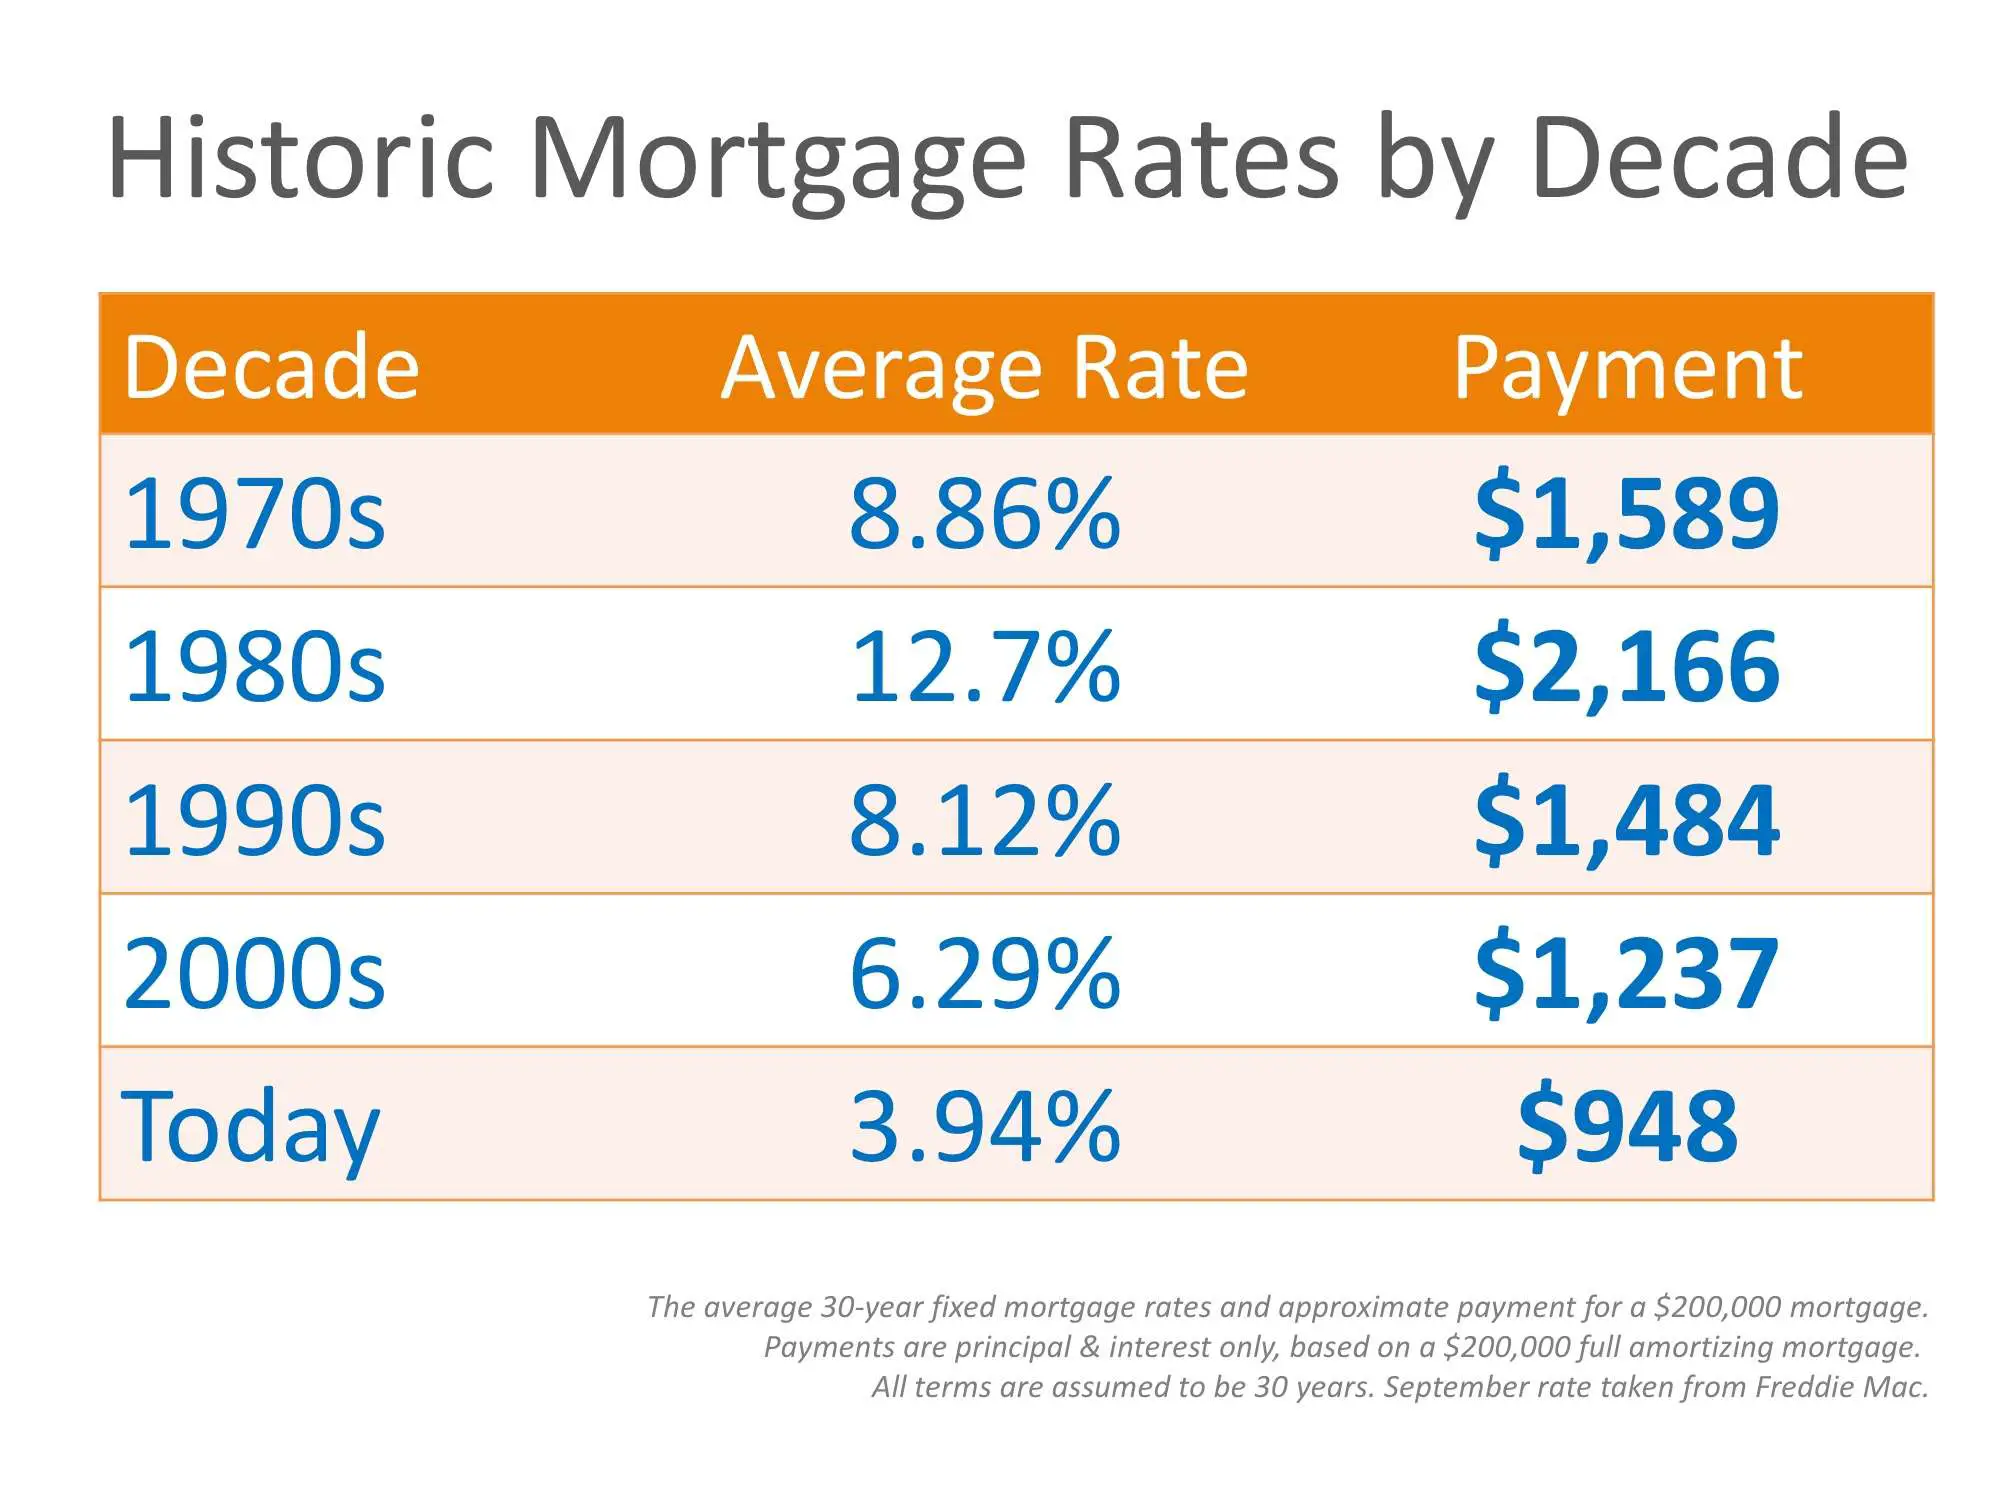 Why Are Mortgage Interest Rates Increasing?